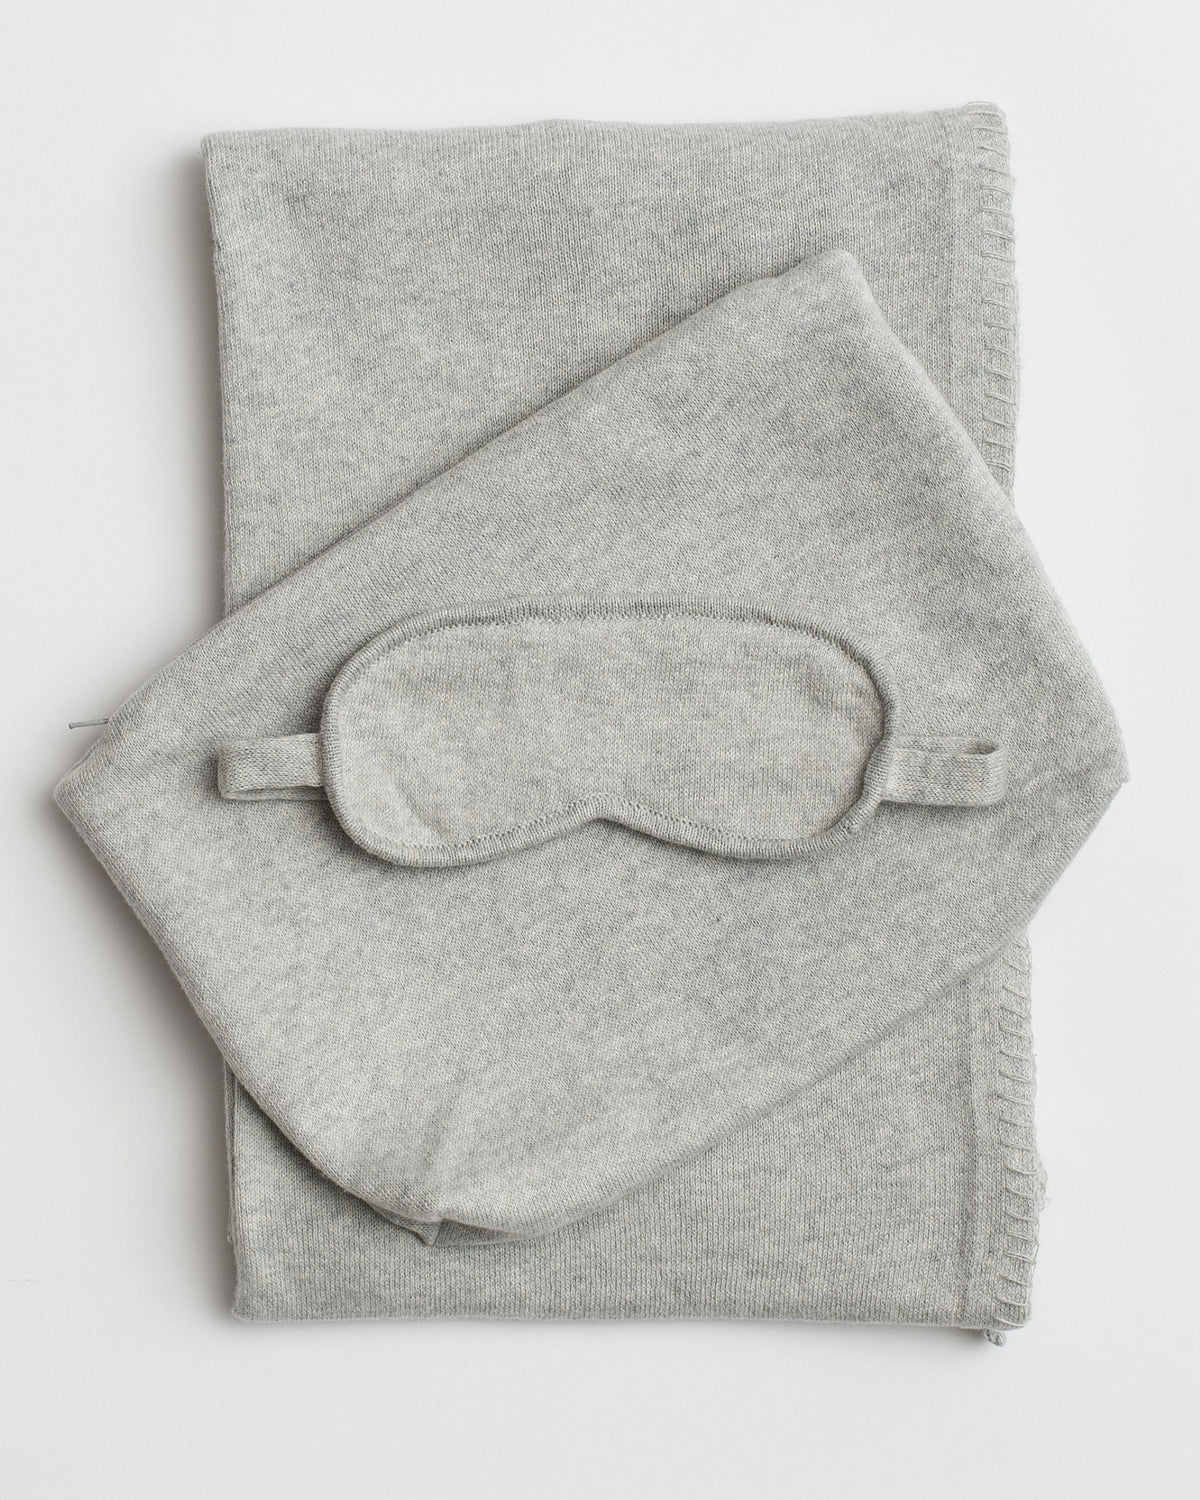 Light Gray Travel Set shown with blanket,  carry pouch and eye mask